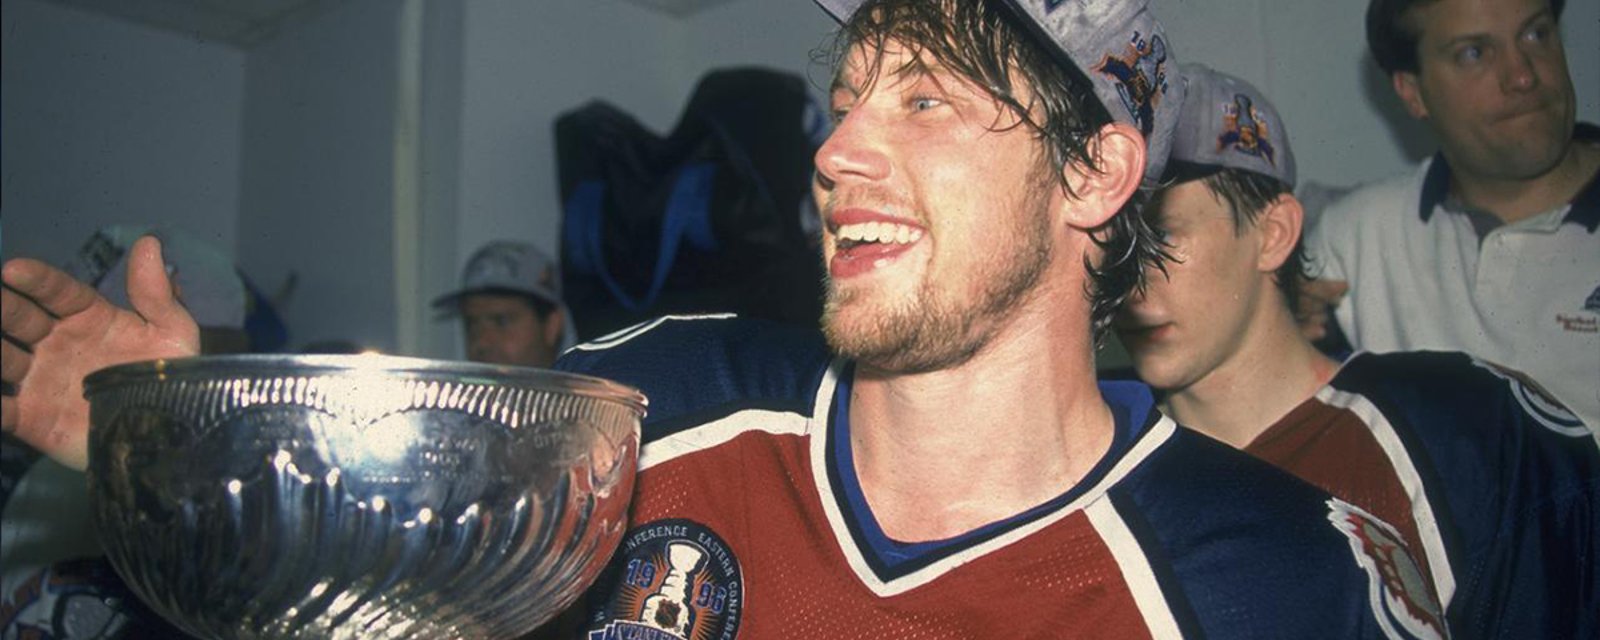 Peter Forsberg is back in the NHL!